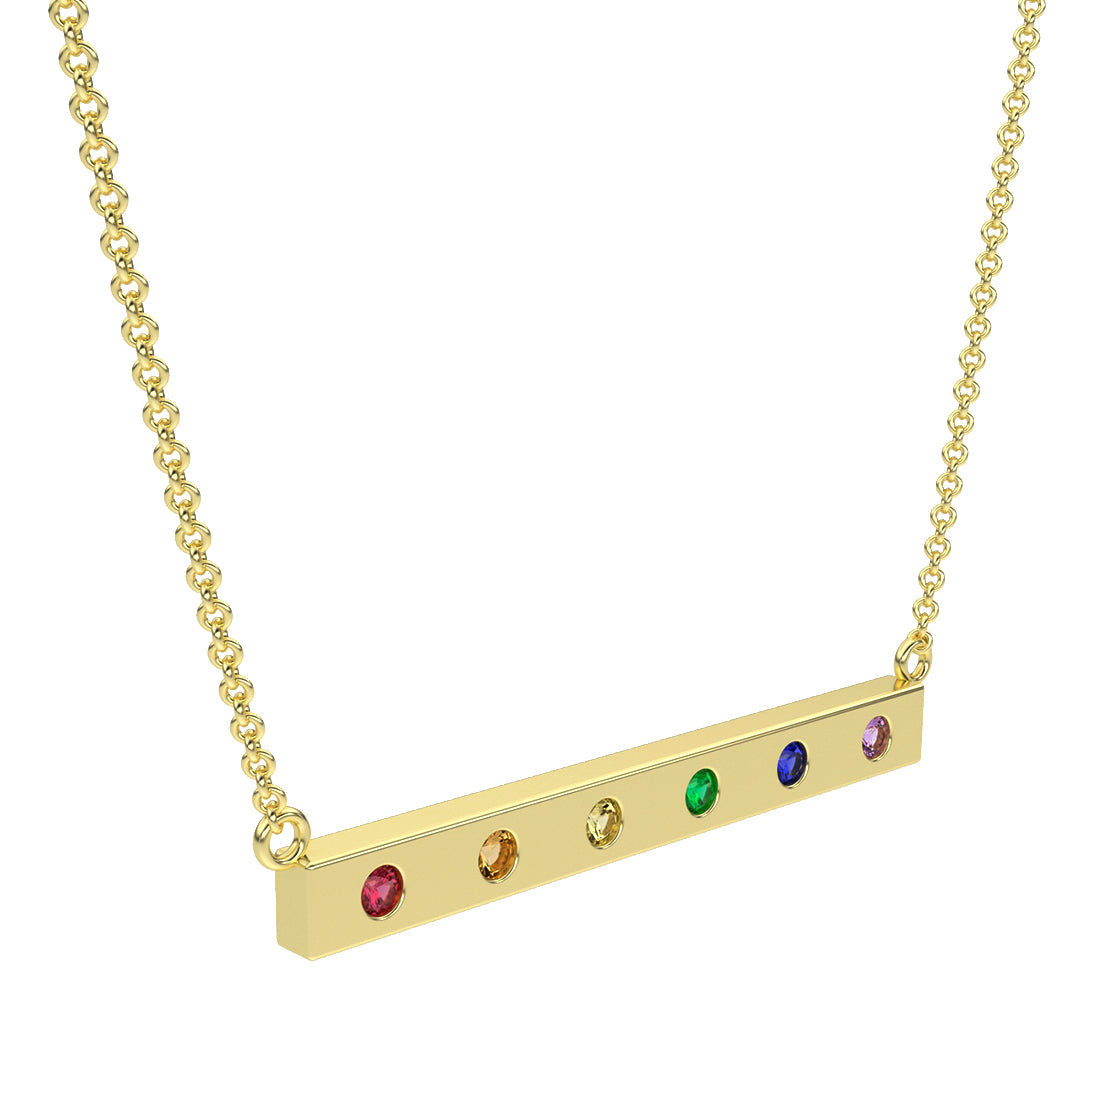 Rainbow Bar Necklace in 14k Yellow Gold